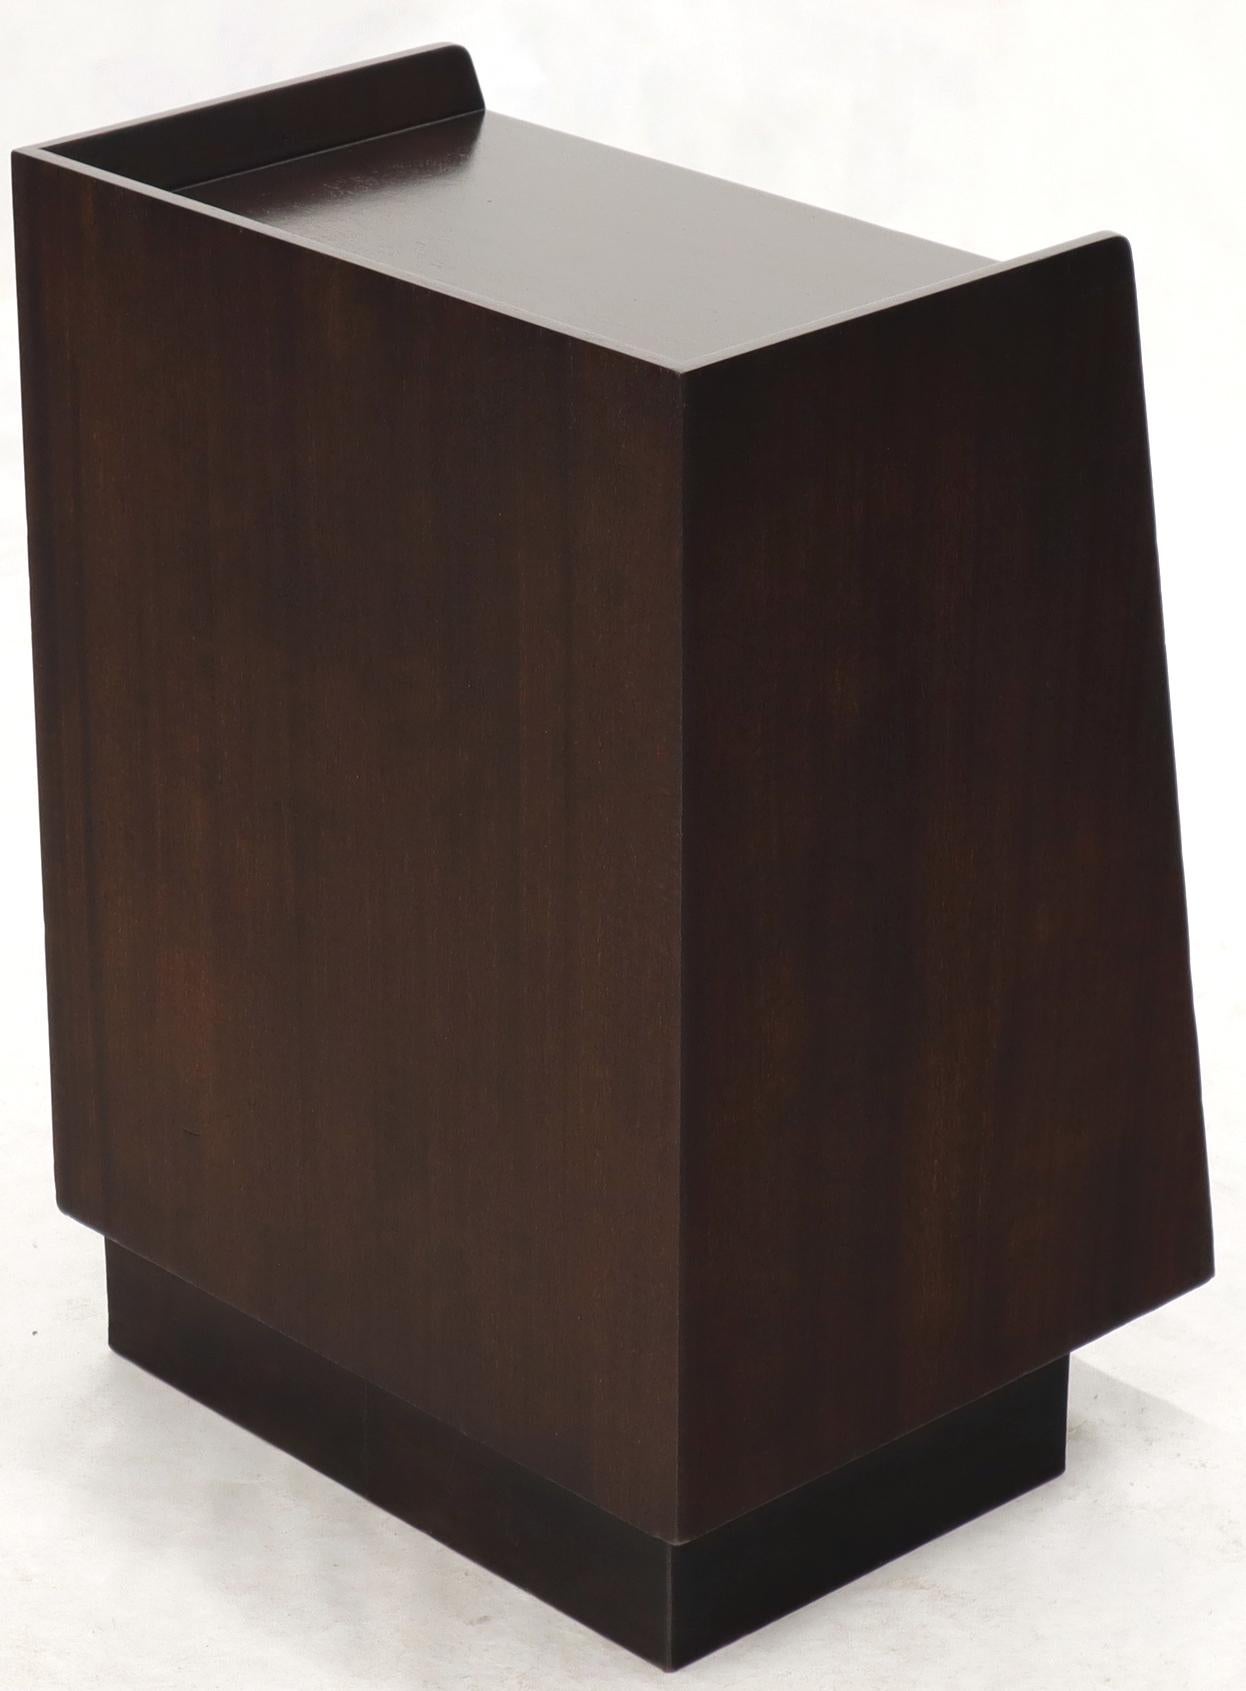 Pair of Edward Wormley for Dunbar Dark Chocolate End Tables Nightstands For Sale 6